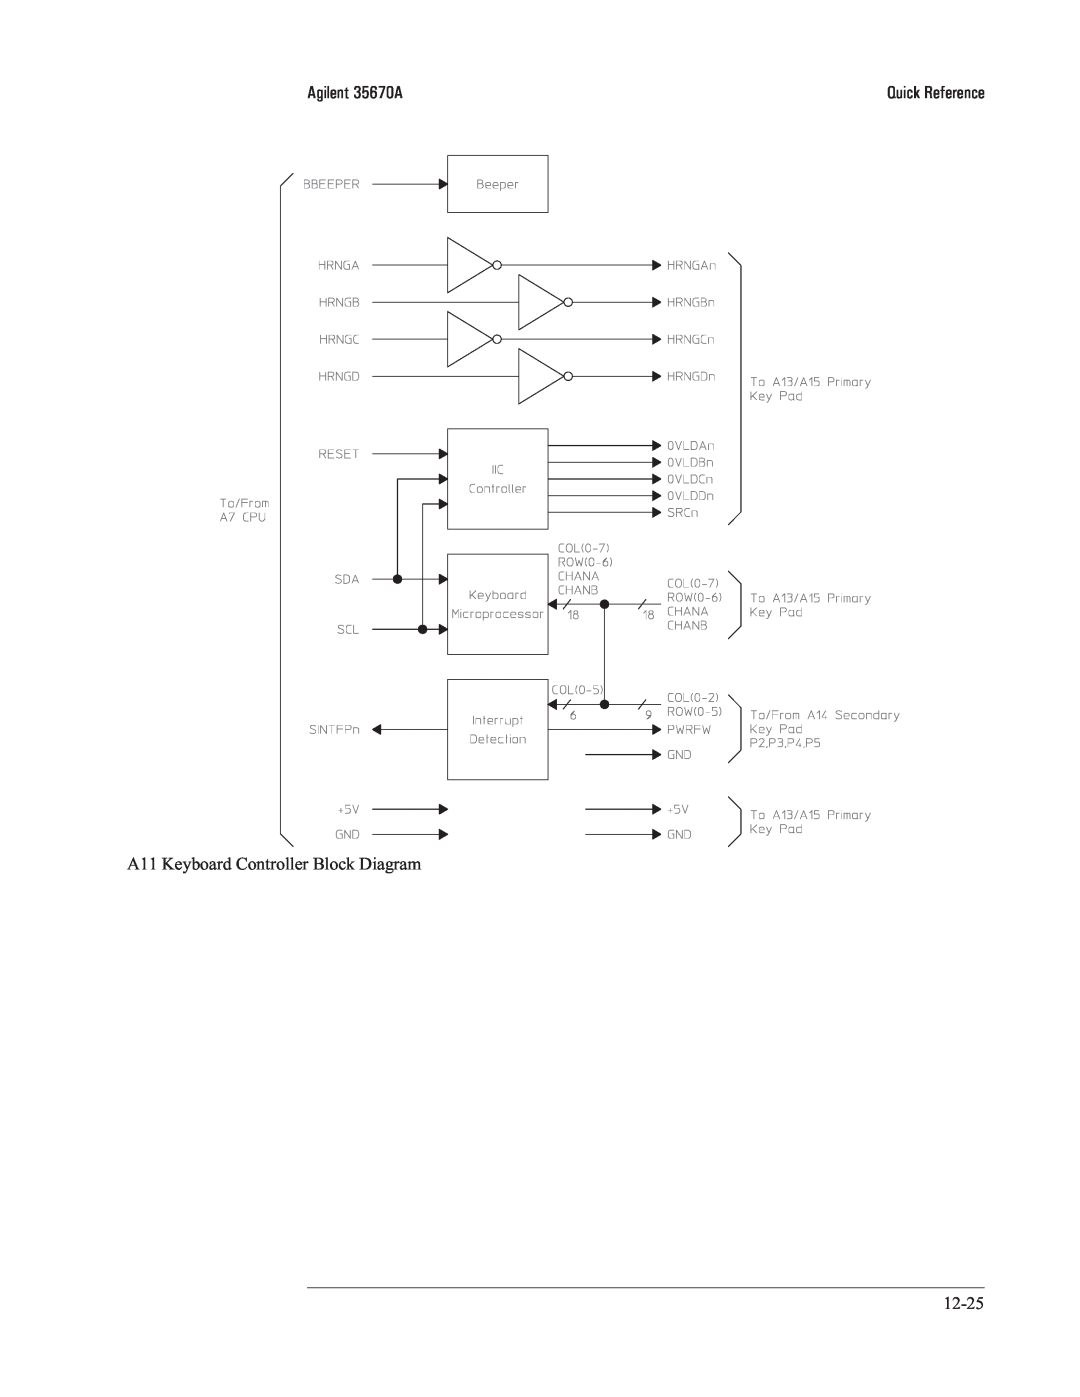 Agilent Technologies 35670-90066 manual Agilent 35670A, A11 Keyboard Controller Block Diagram, Quick Reference 